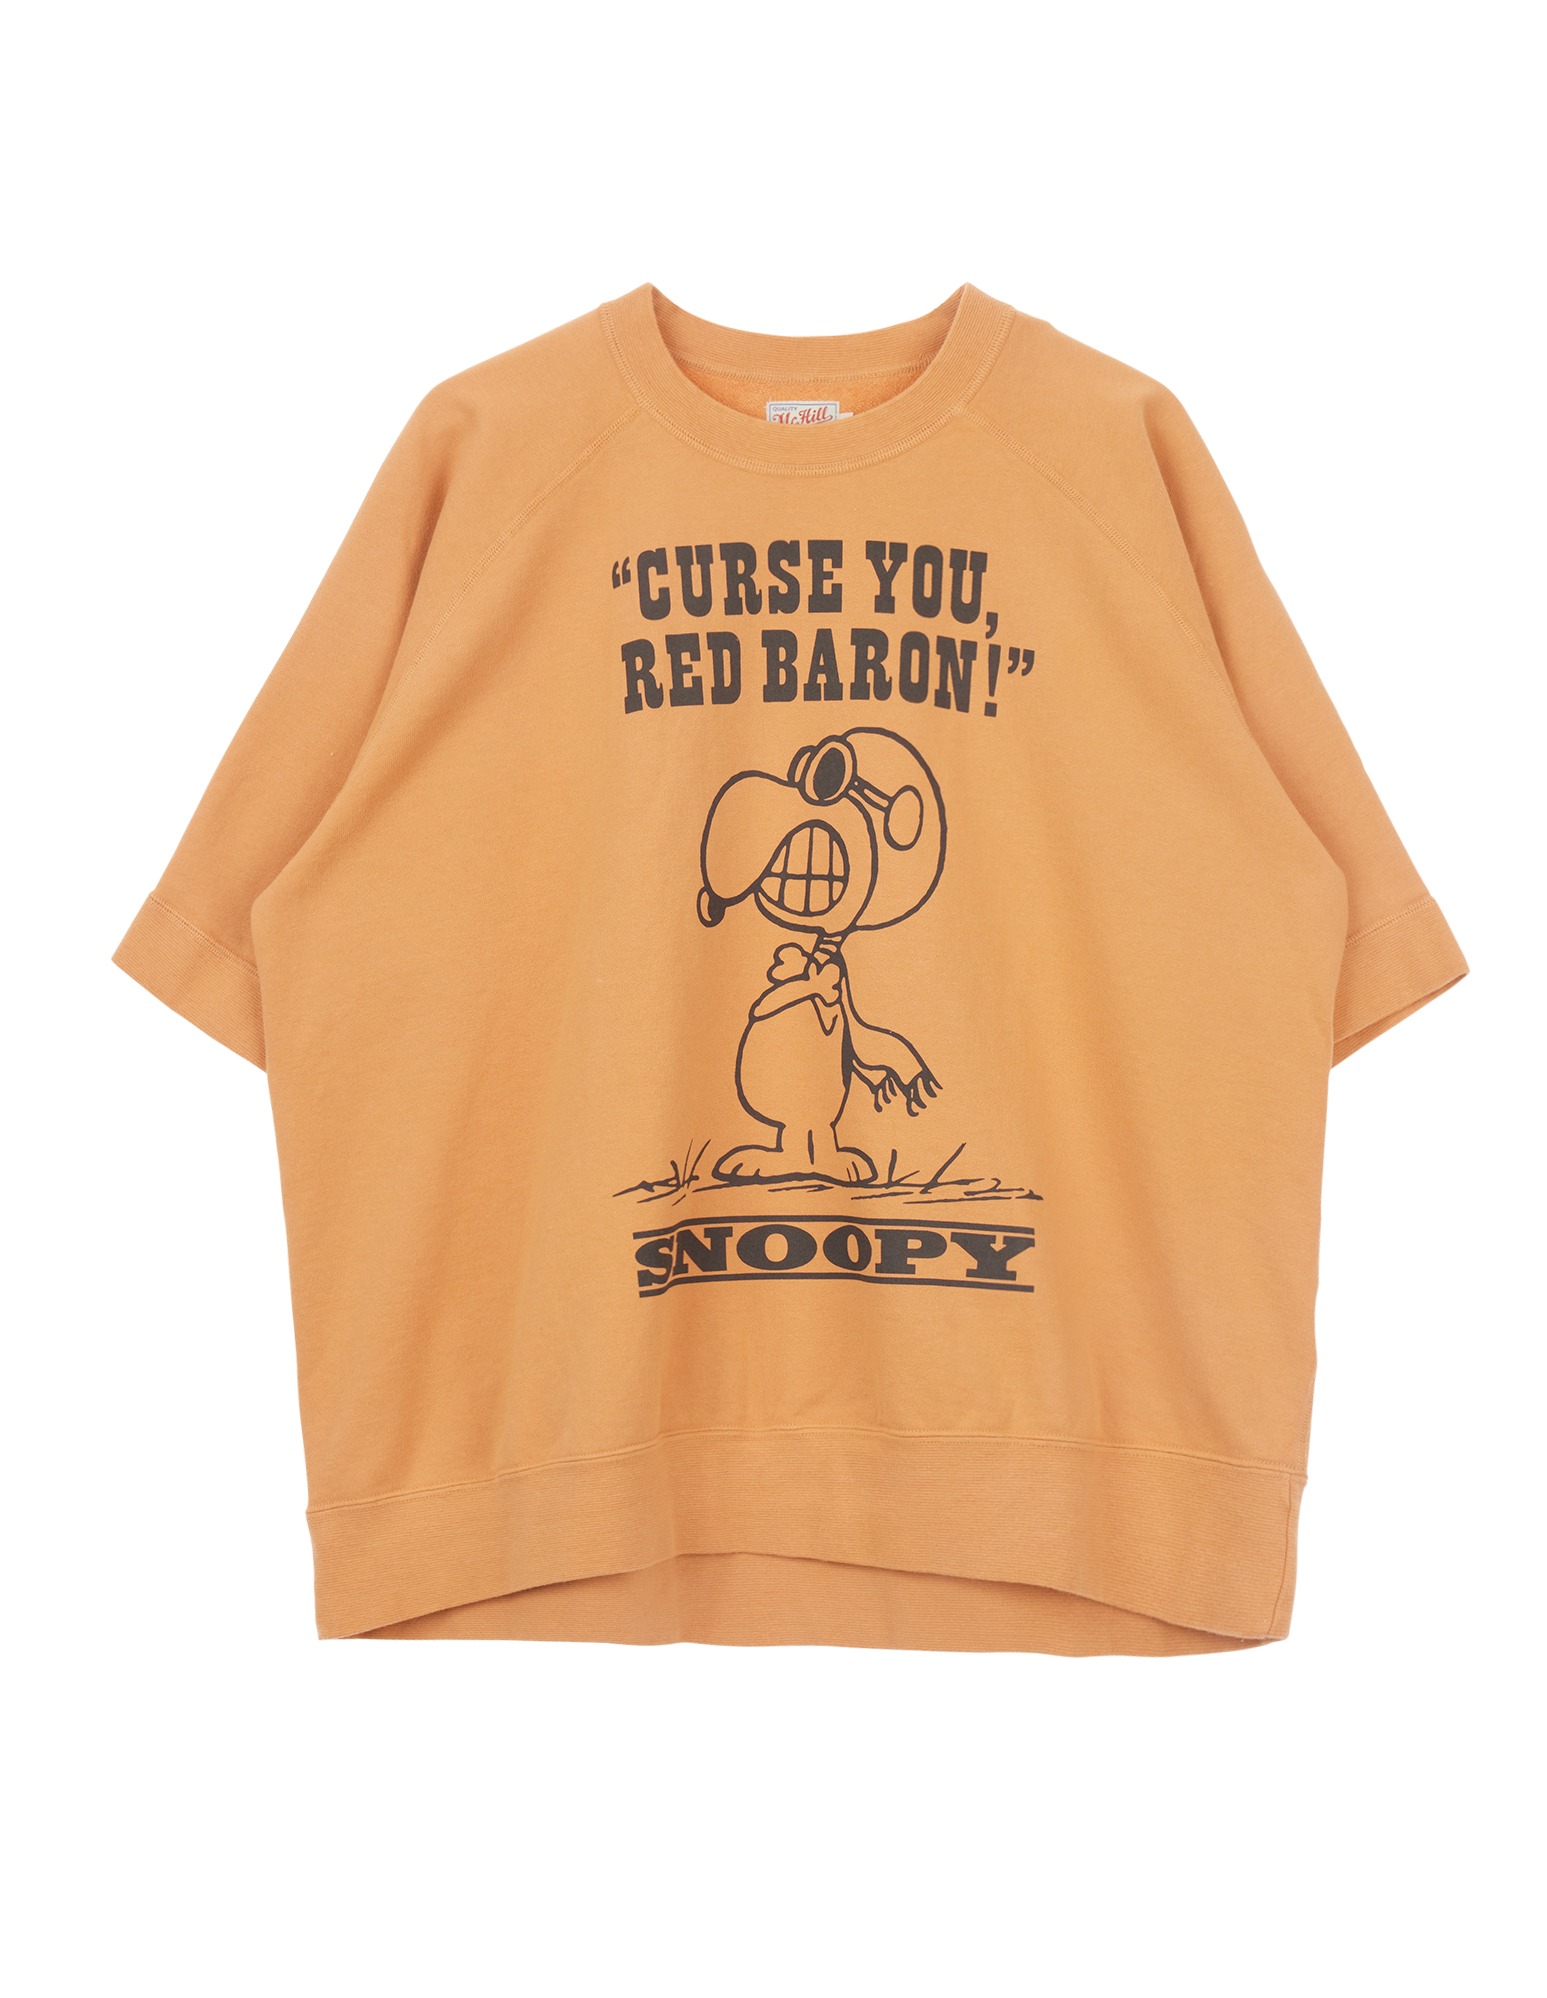 TMC2420 SHORT SLEEVE SWEAT SHIRT SNOOPY &quot;CURSE YOU, RED BARON!&quot; (Gold)